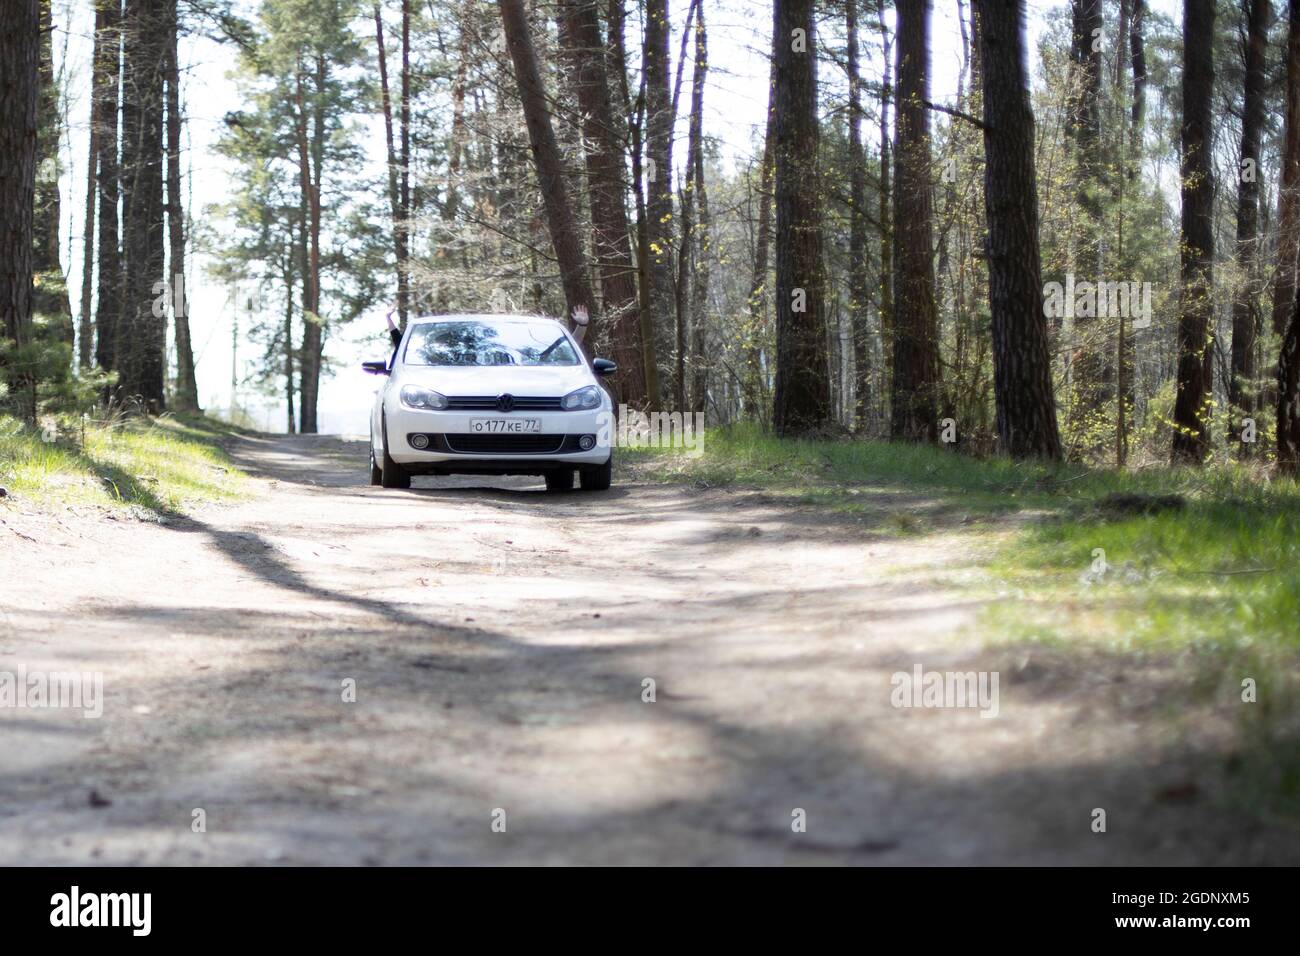 moscow, russia - may 15, 2020: flagship hatchback Volkswagen golf VI white color rides forest country road sumer dar Stock Photo